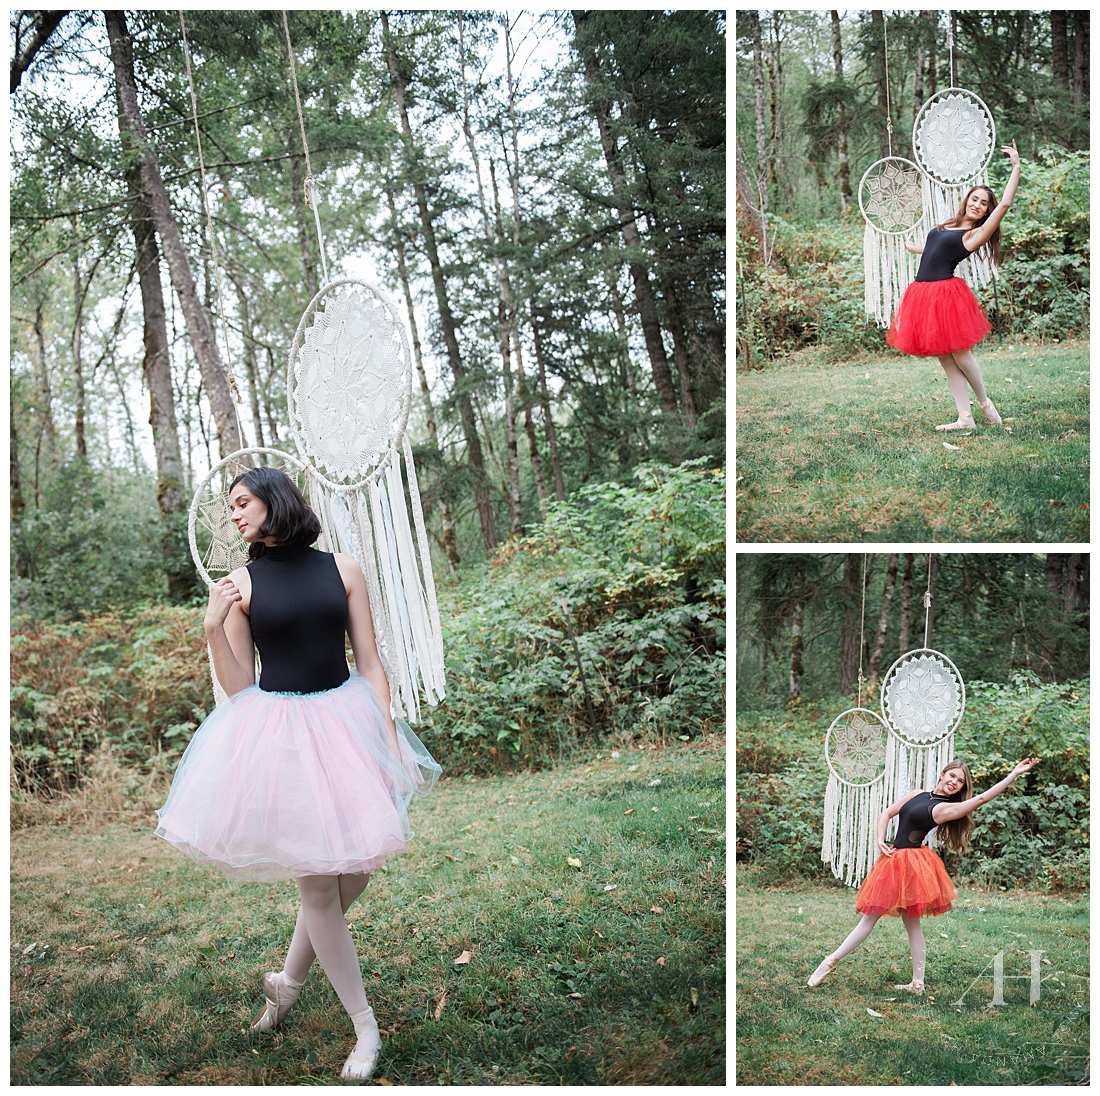 Fantasy Photoshoot with Ballerinas in a Lush Green Forest | Photographed by Tacoma Senior Photographer Amanda Howse 